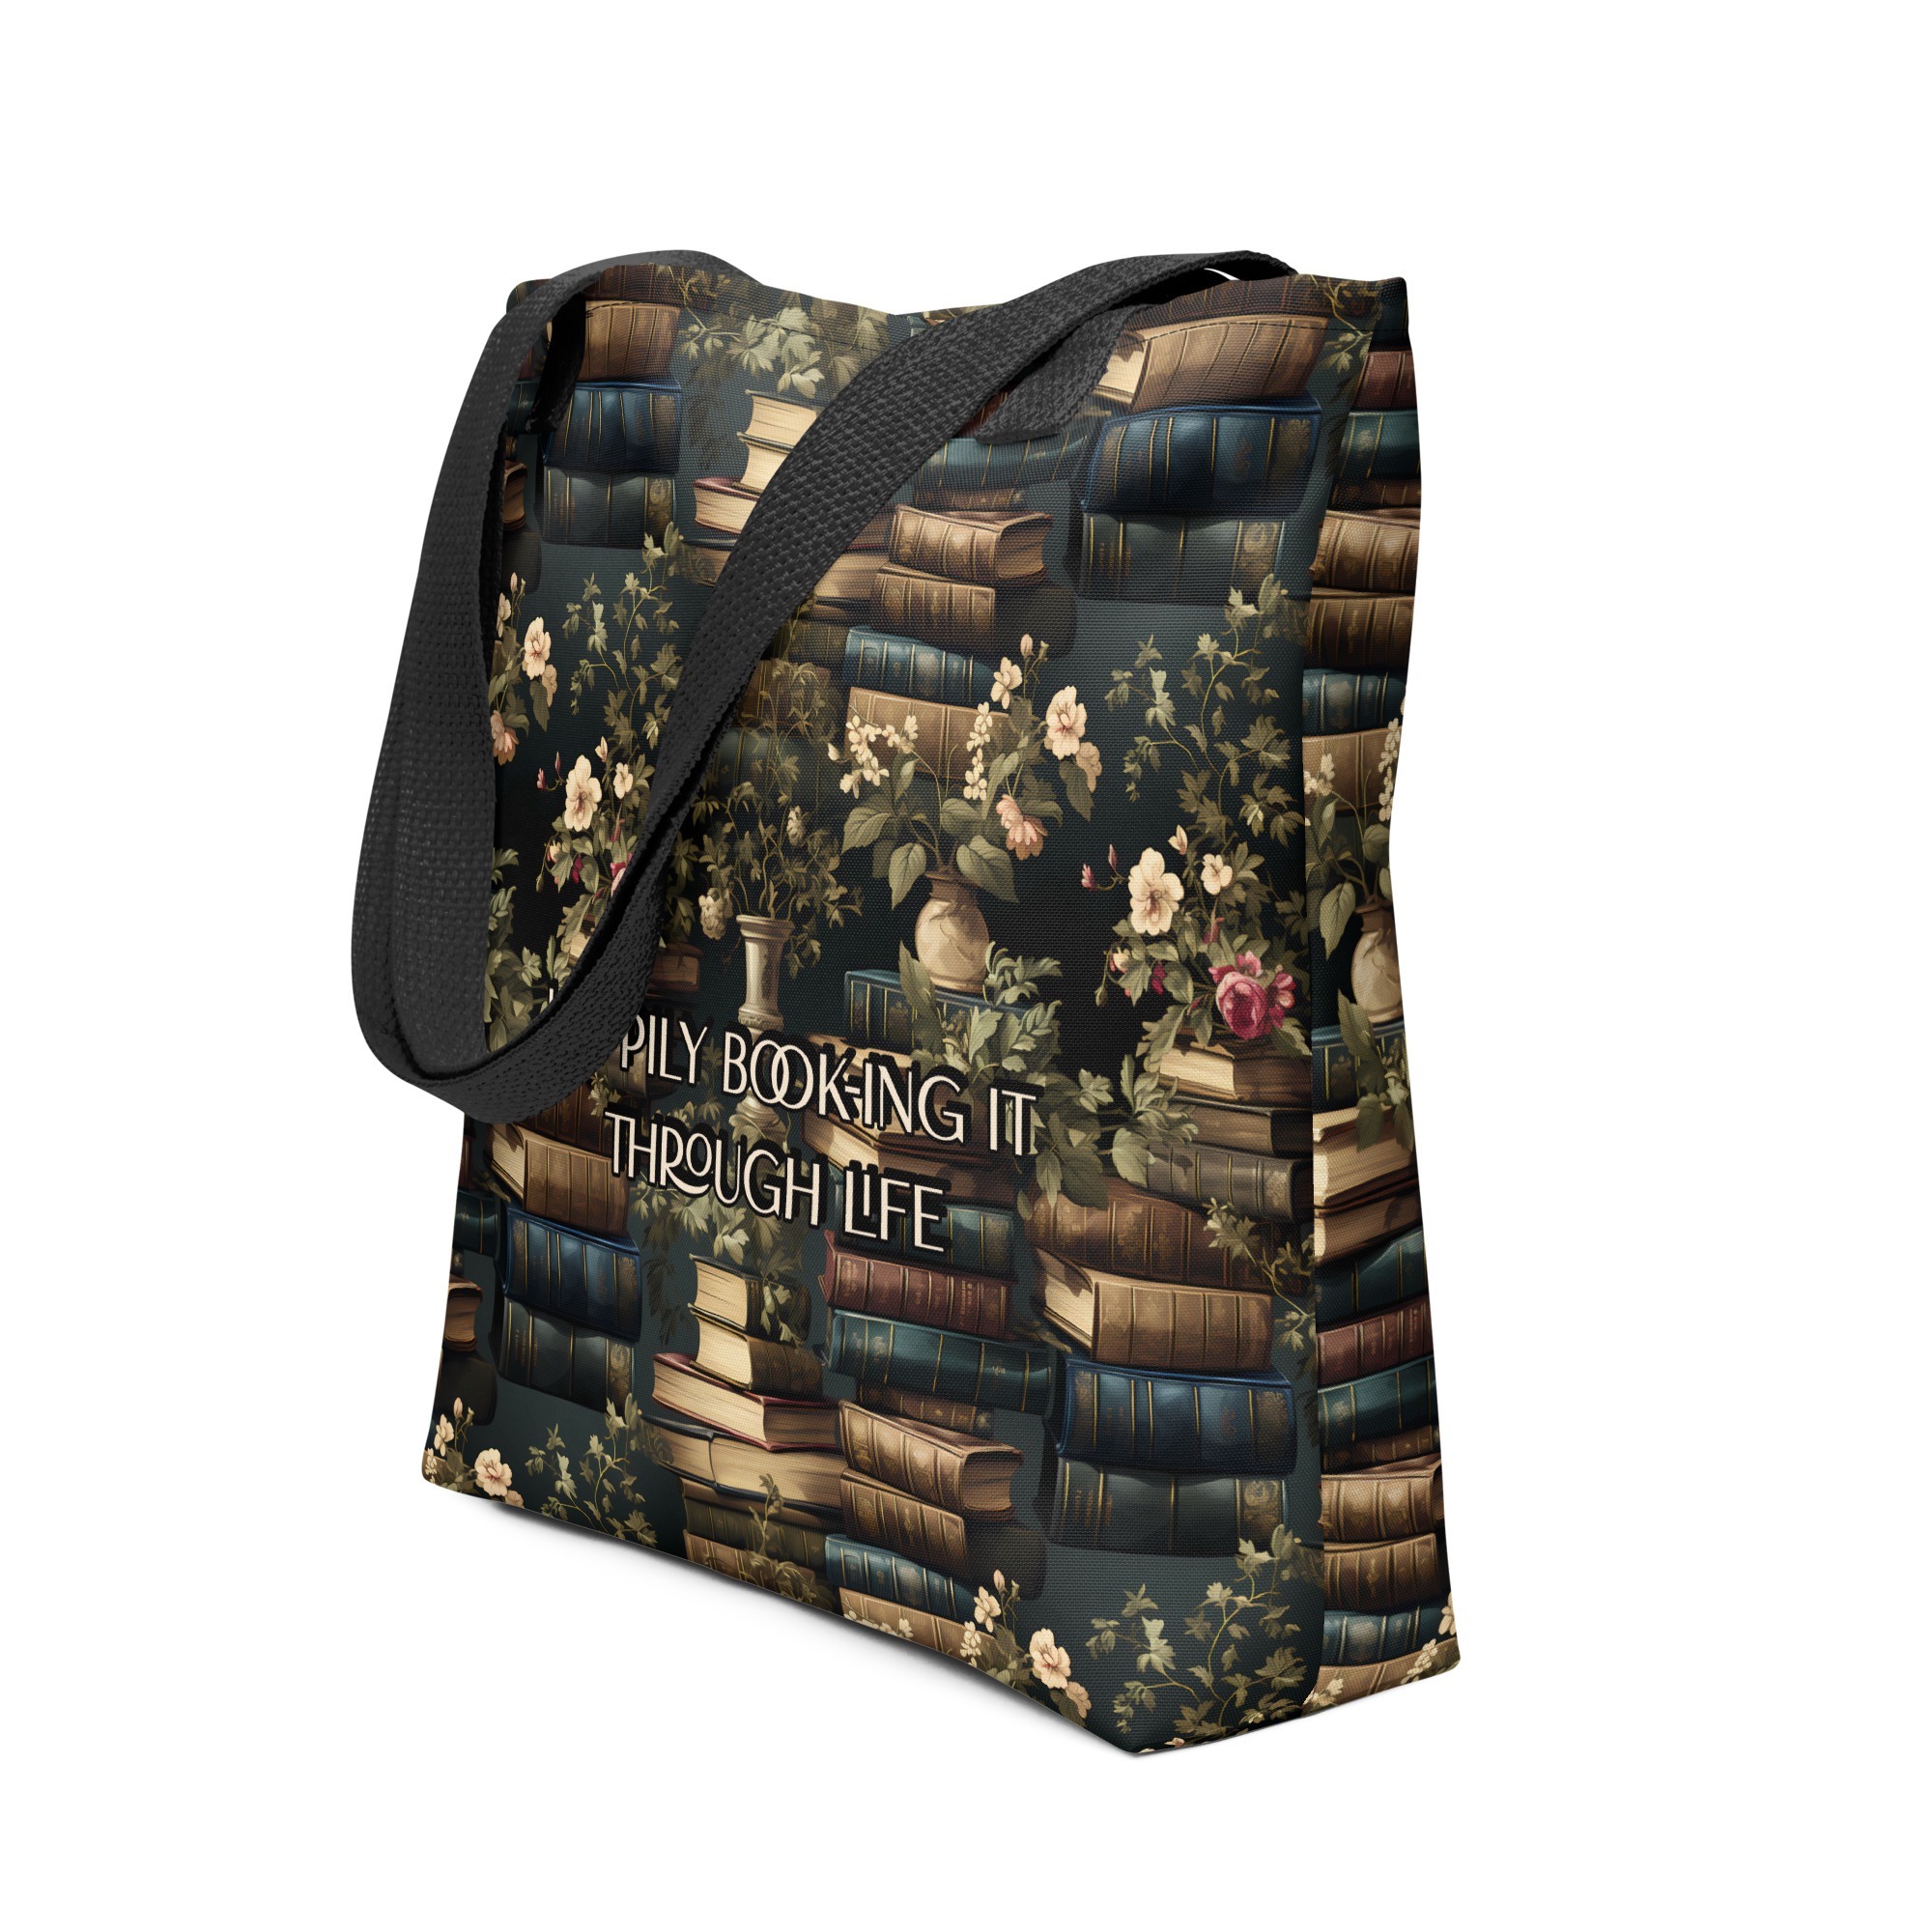 Happily Booking It Through Life | Gifts for bookworms | Tote bag